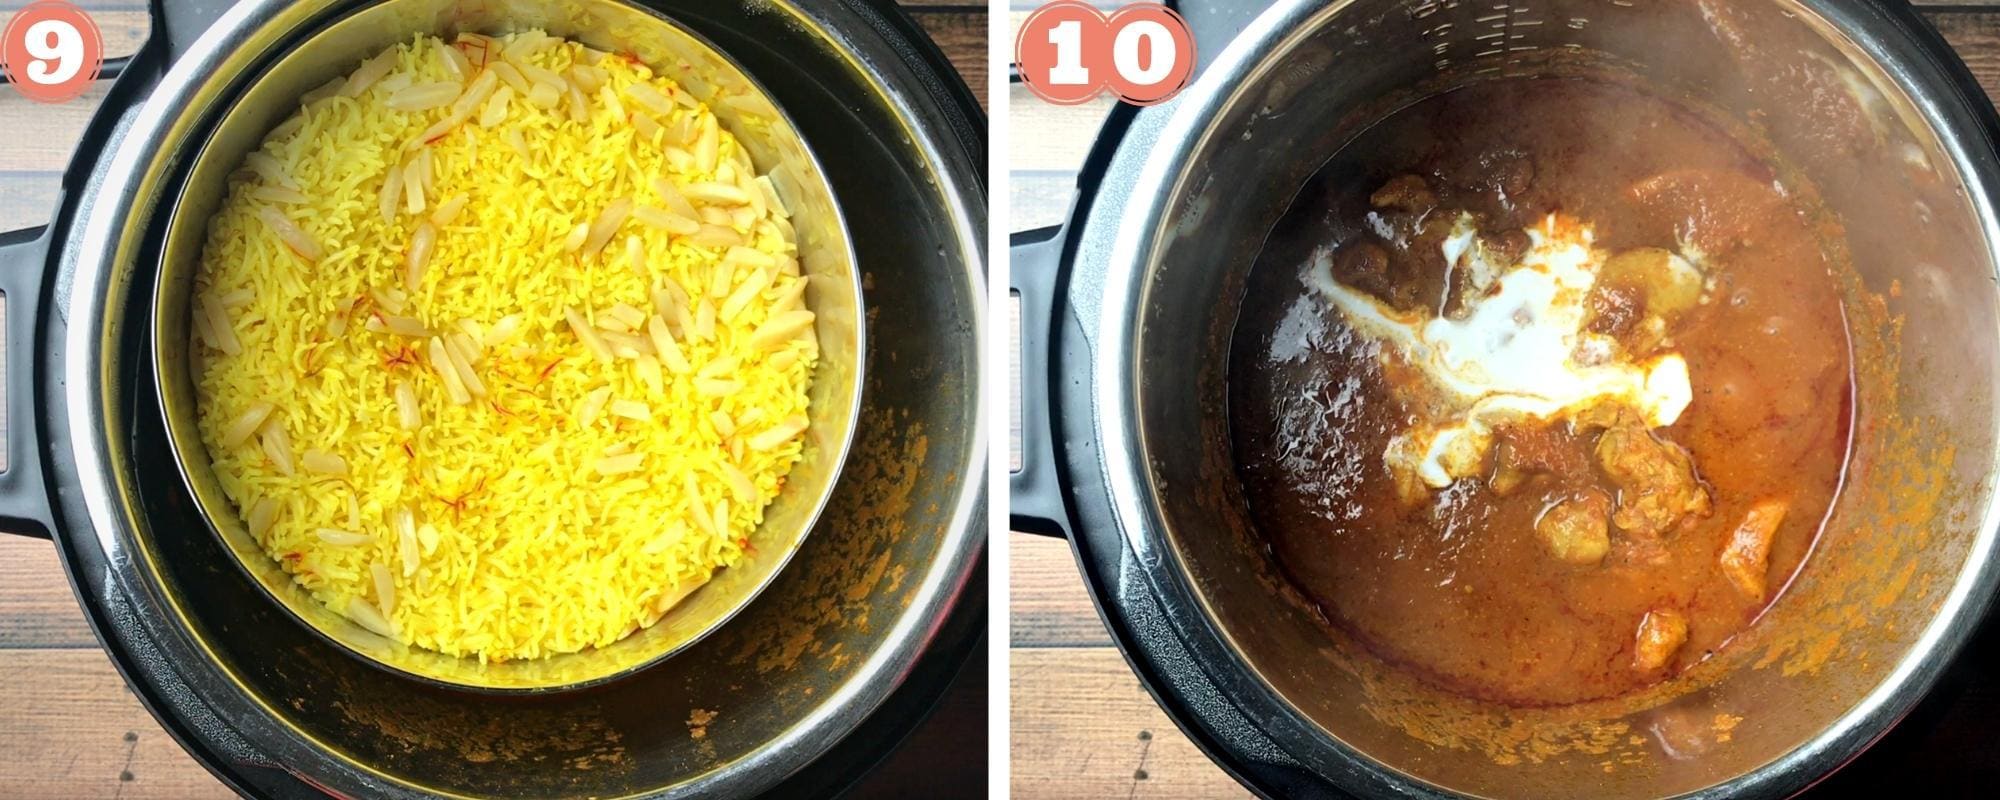 two in process images of saffron rice and butter chicken in the instant pot